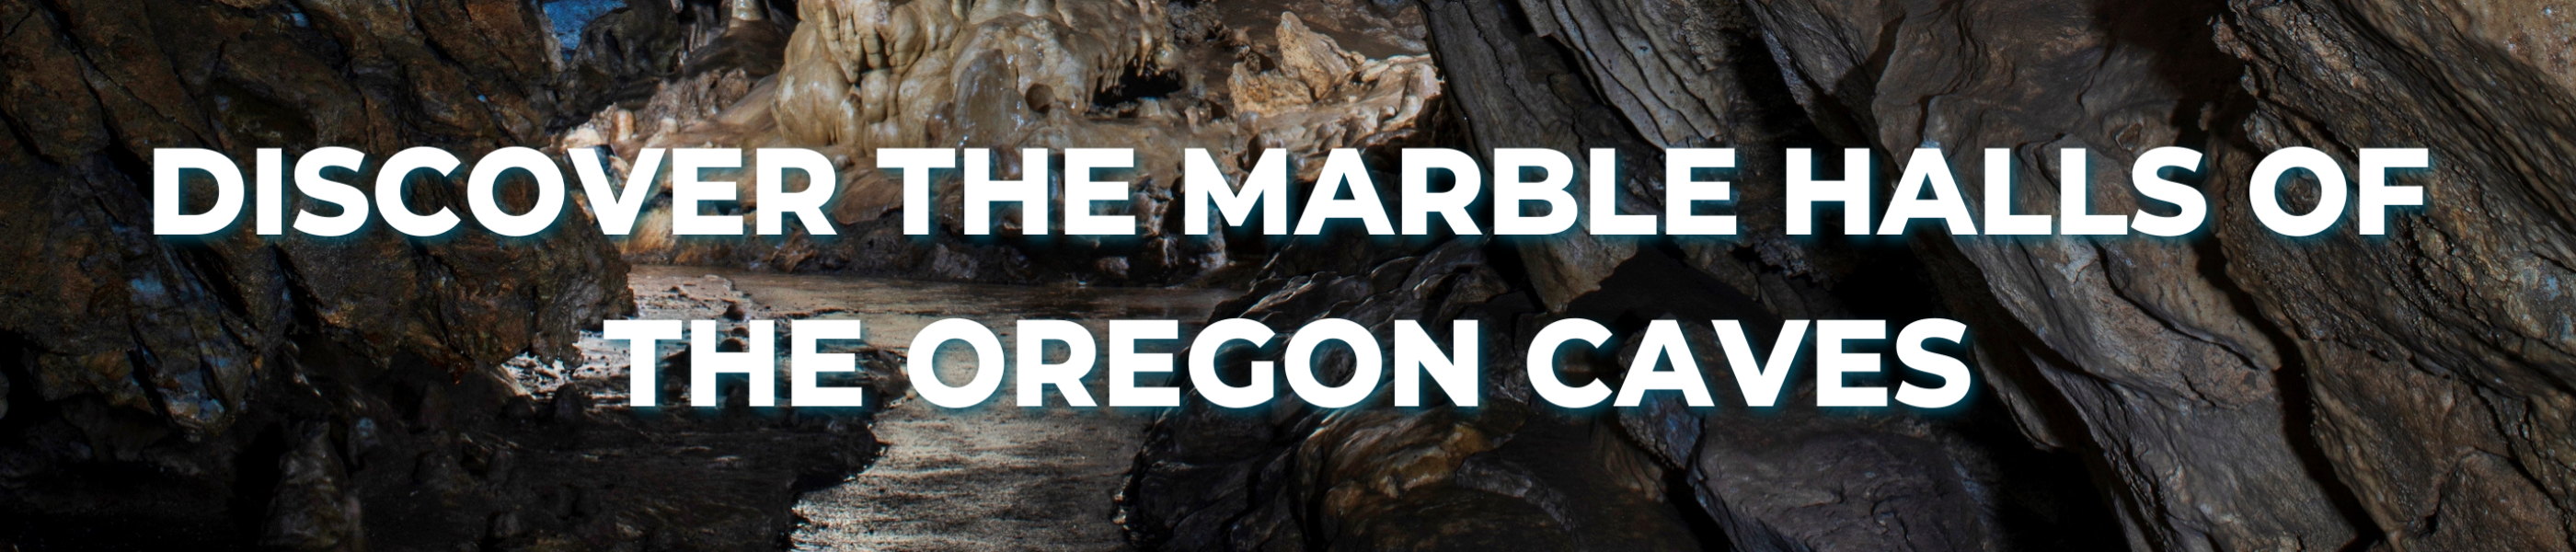 blog header, explore the marble halls of the oregon caves